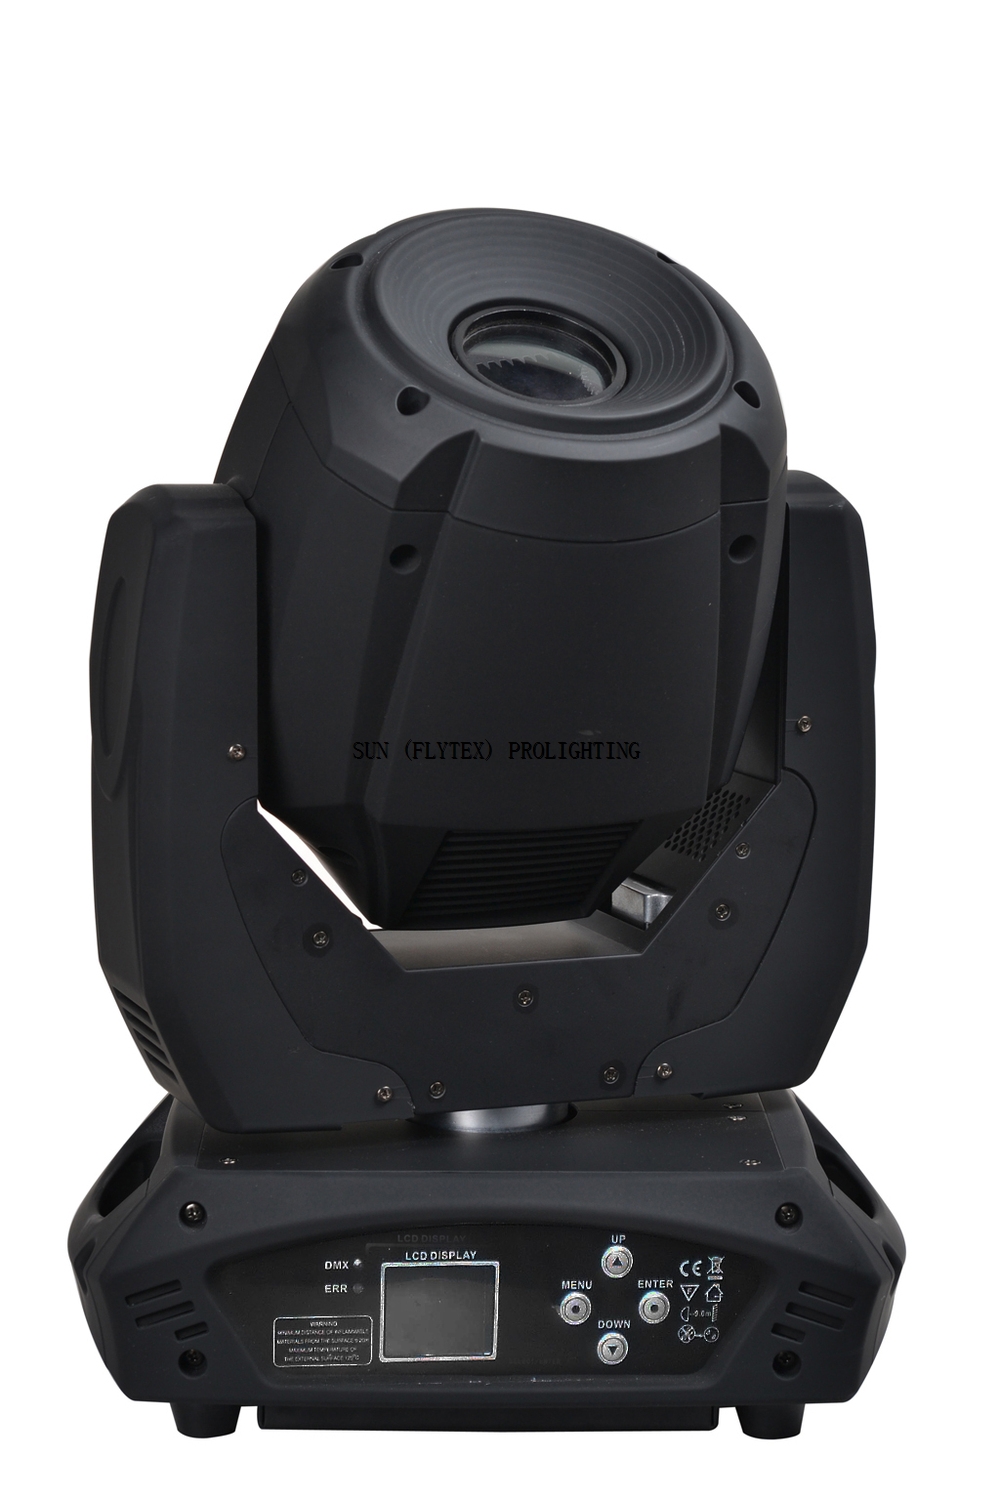 7R 230W spot moving head stage light